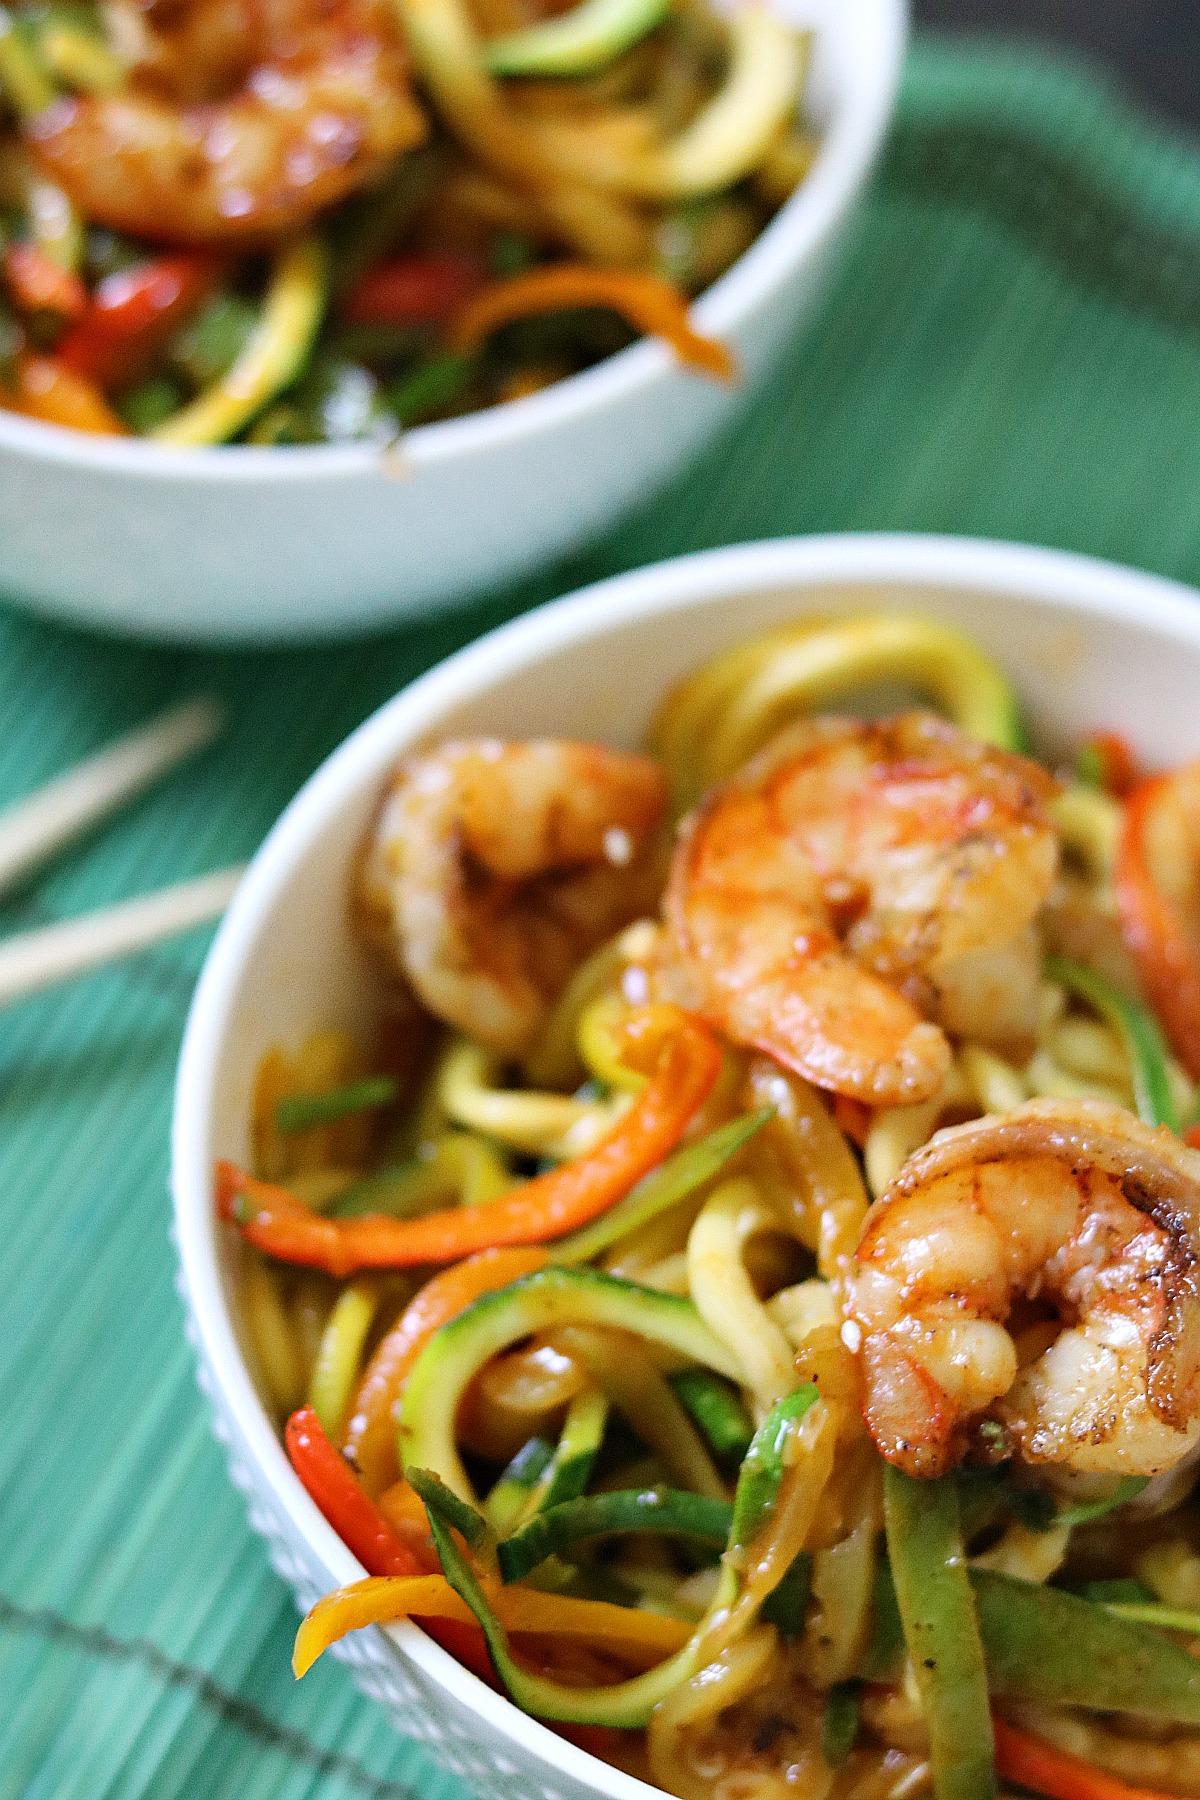 Homemade pad thai sauce, simple zucchini noodles and perfectly cooked shrimp in this low carb pad thai recipe